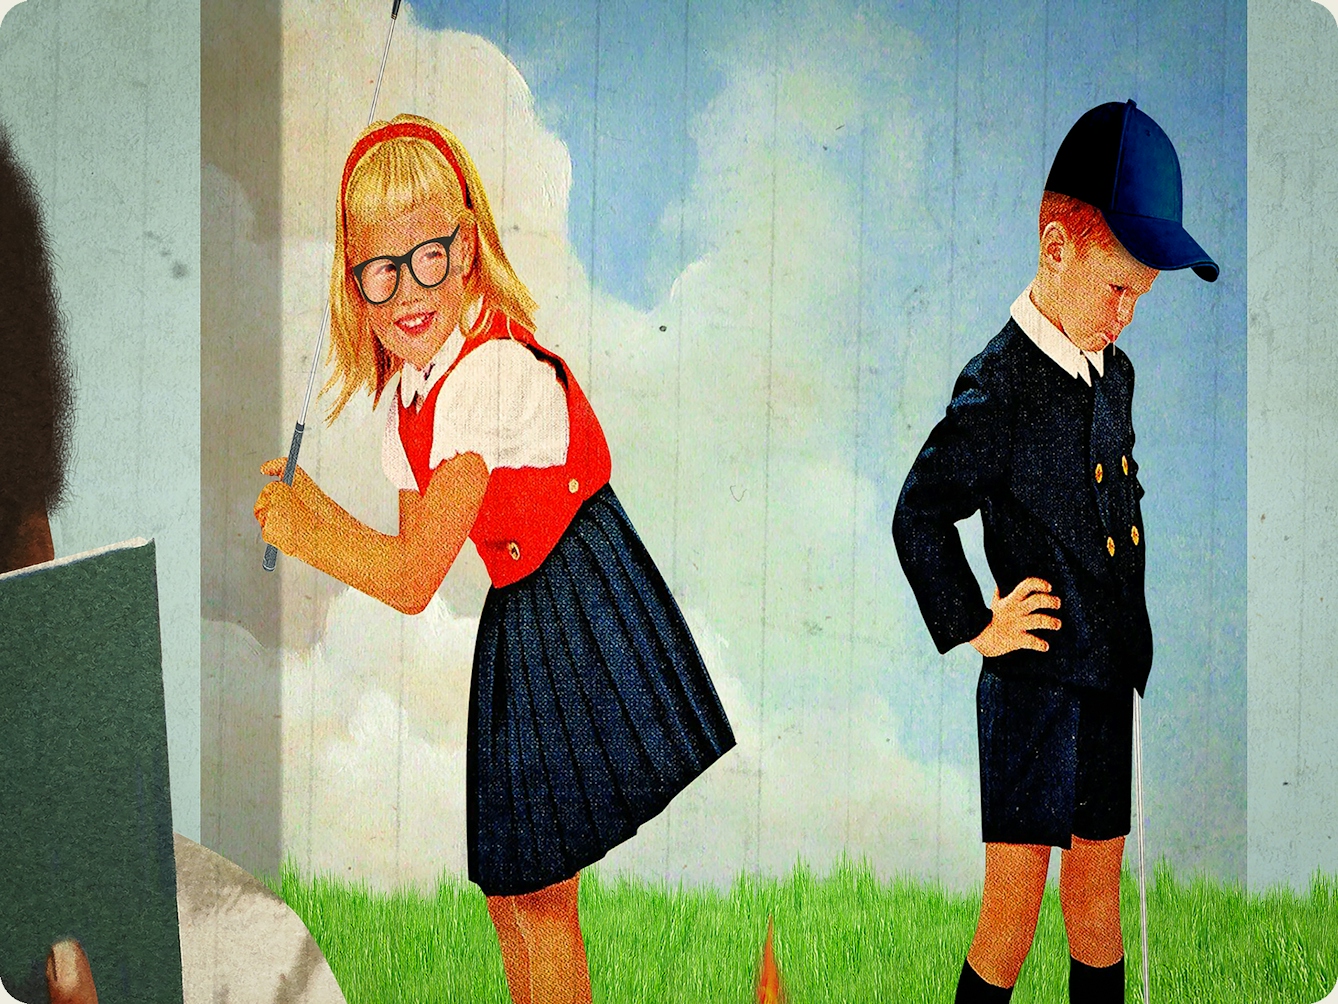 Detail from a larger mixed media digital artwork combining found imagery from vintage magazines and books with painted and textured elements. The overall hues are pastel blues, pinks and greys with elements of harsh reds and greens. This detail shows a scene with a young boy and girl dressed in 1950s American era clothes. They are playing golf. The girl has a large smile on her face and has a golf club raised behind her head, about to strike a golf ball resting on a 'T' in the grass. The golf ball appears to be on fire. The boy is standing on the other side of the ball facing away from the girl. He has his hands on his hips and his head bend towards the floor. His has an upset, sulking expression on his face. Behind them both is a blue sky with white fluffy clouds.